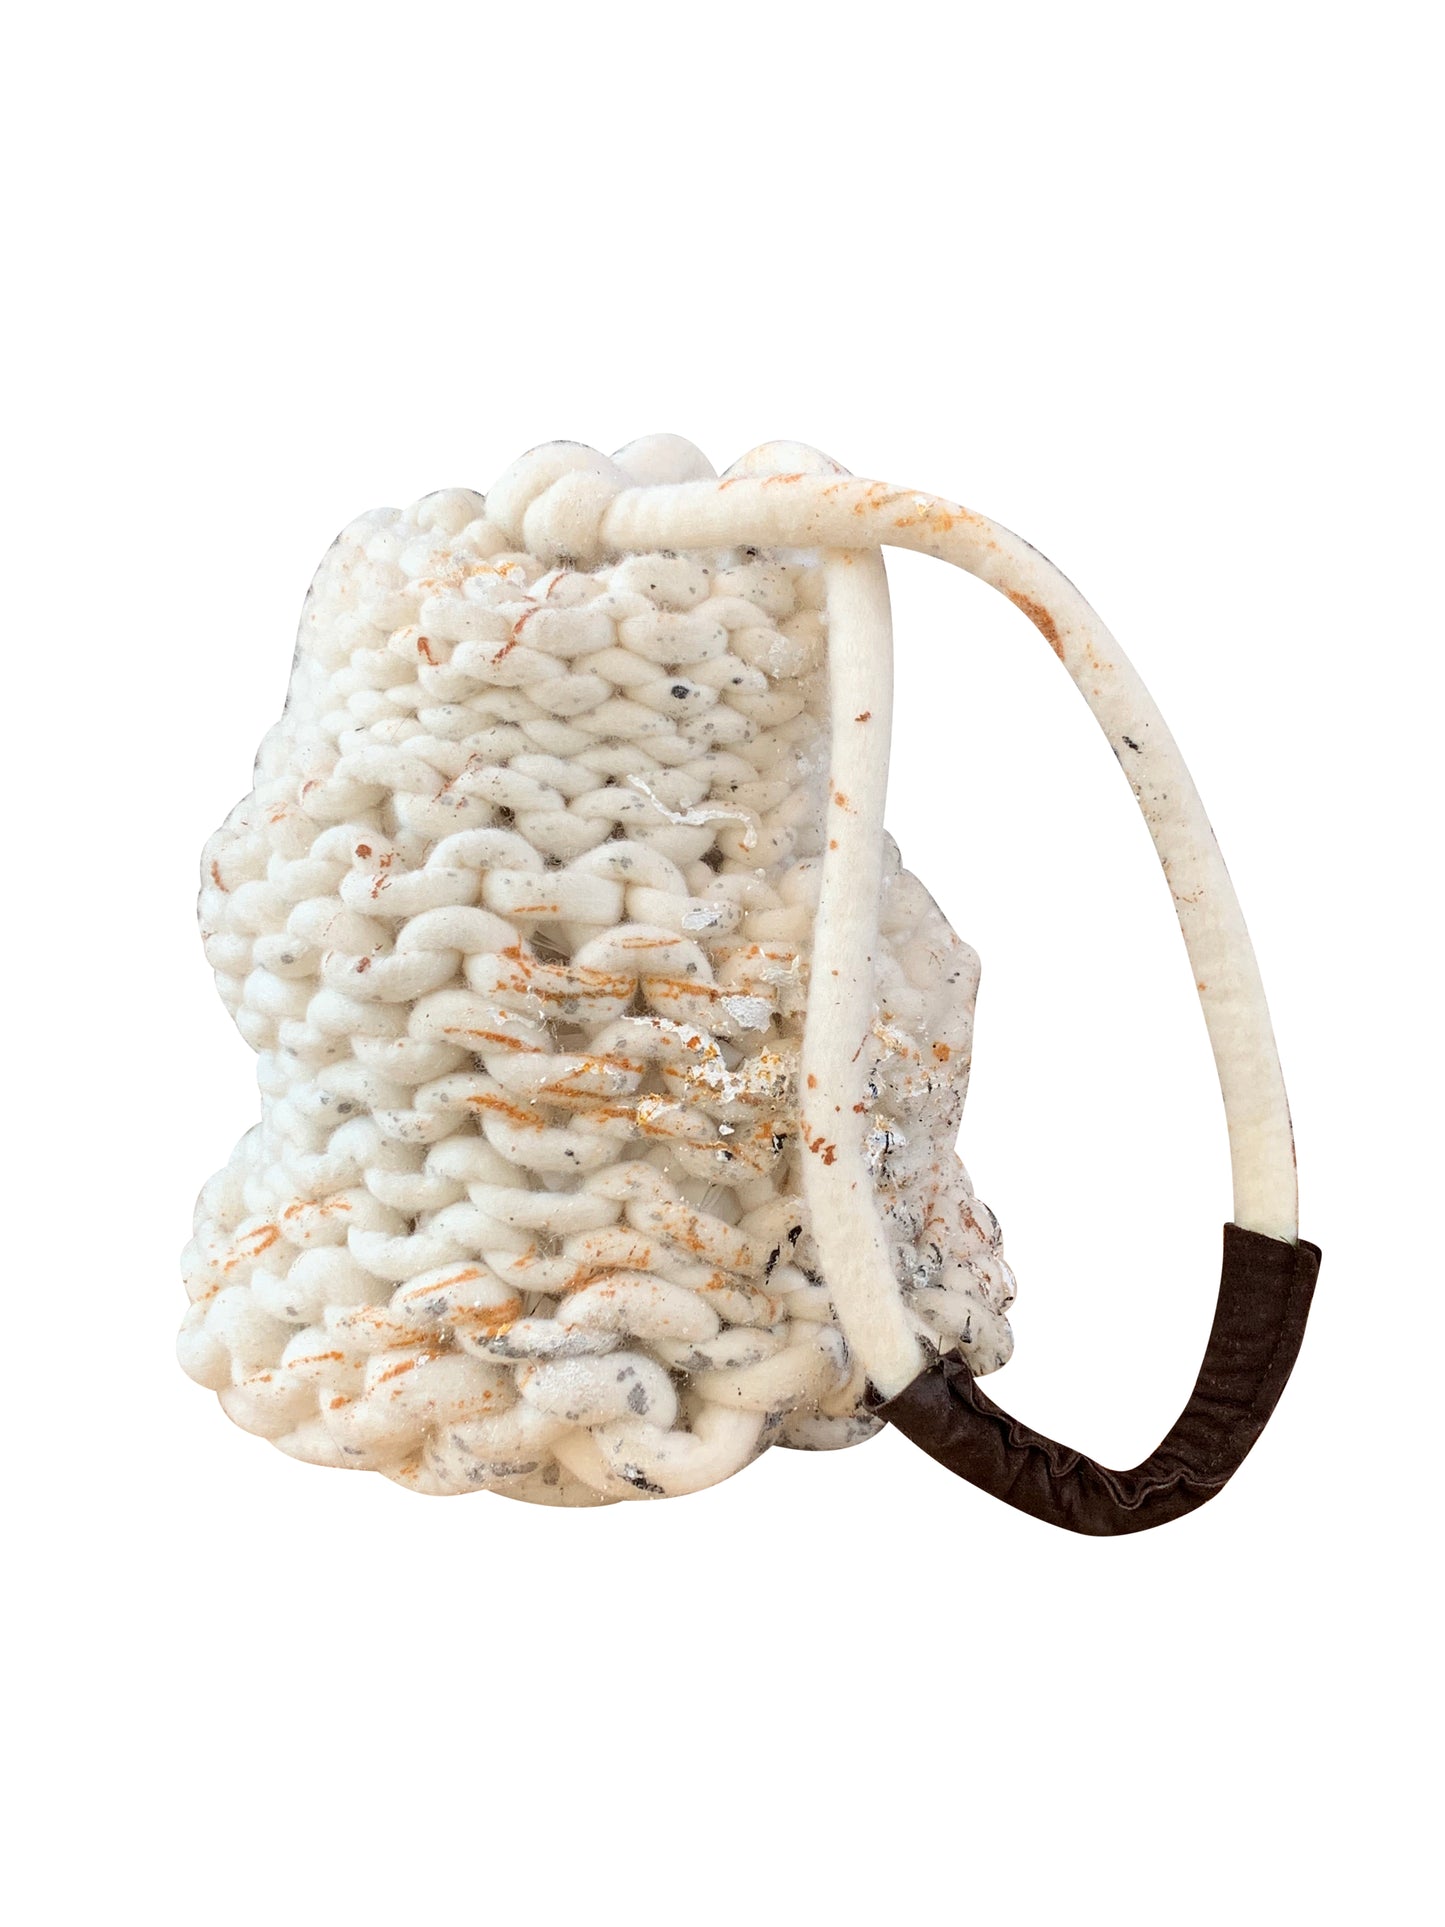 Artisanal Hand Knitted Ceramic bag in Pure Wool